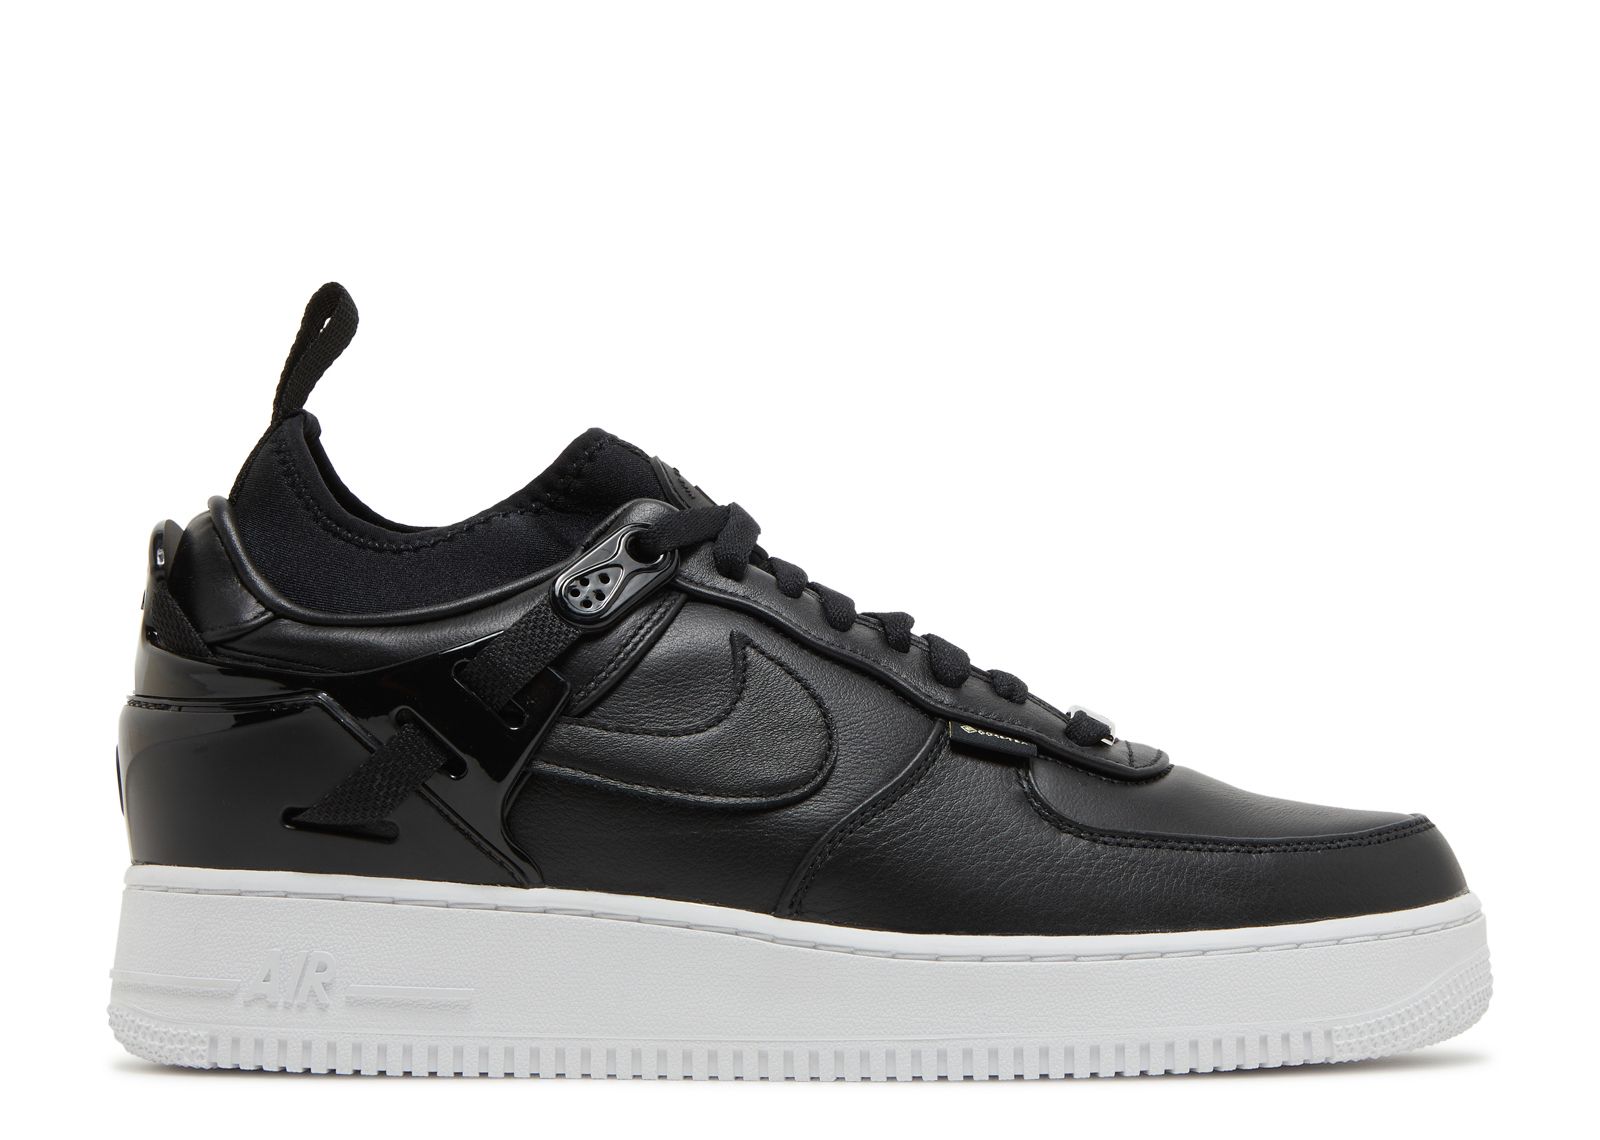 Undercover X Air Force 1 Low SP GORE TEX 'Black' - Nike - DQ7558 